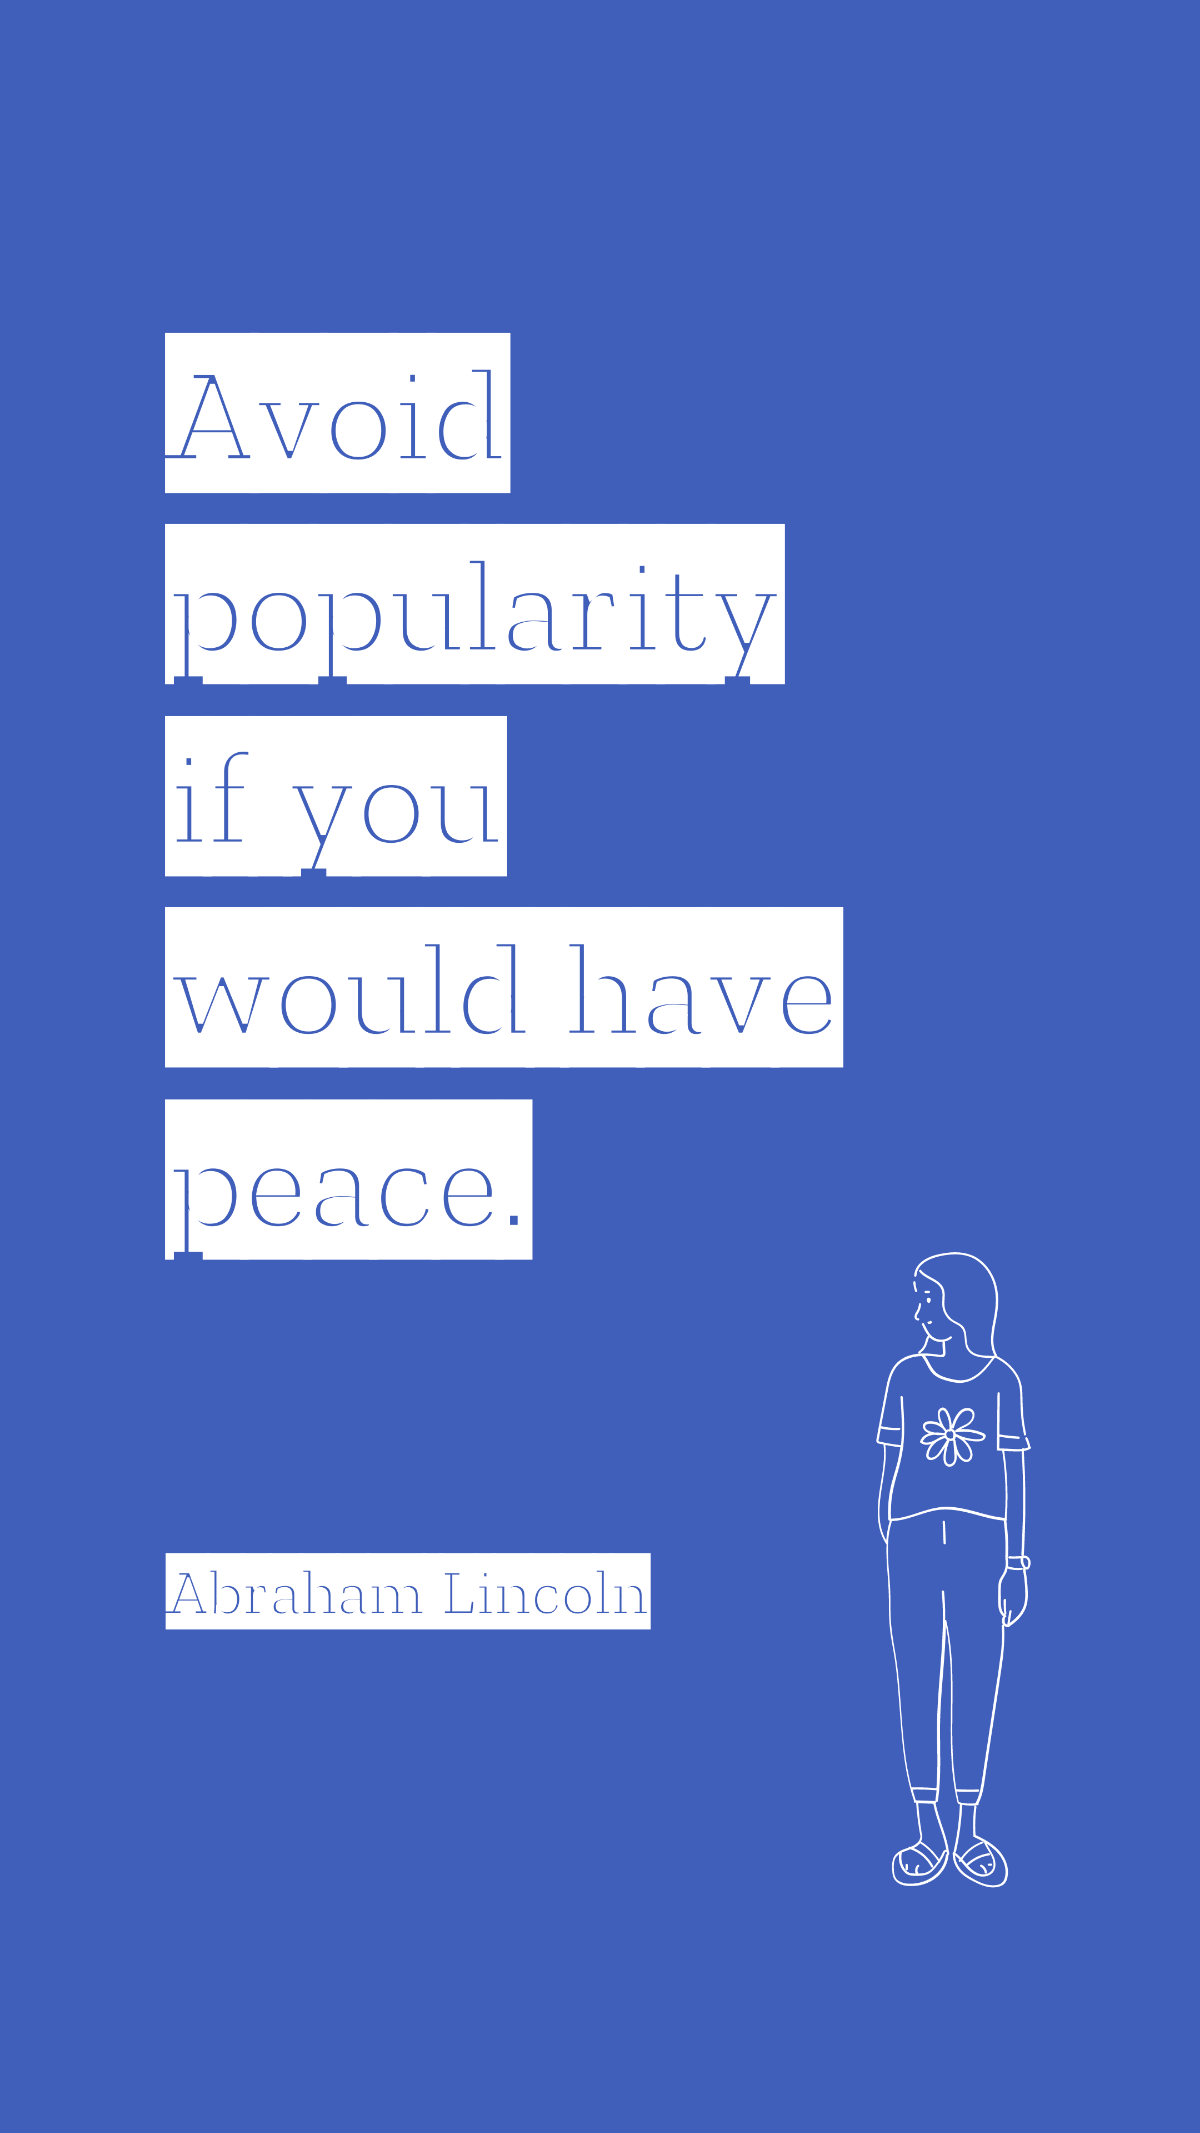 Abraham Lincoln - Avoid popularity if you would have peace.